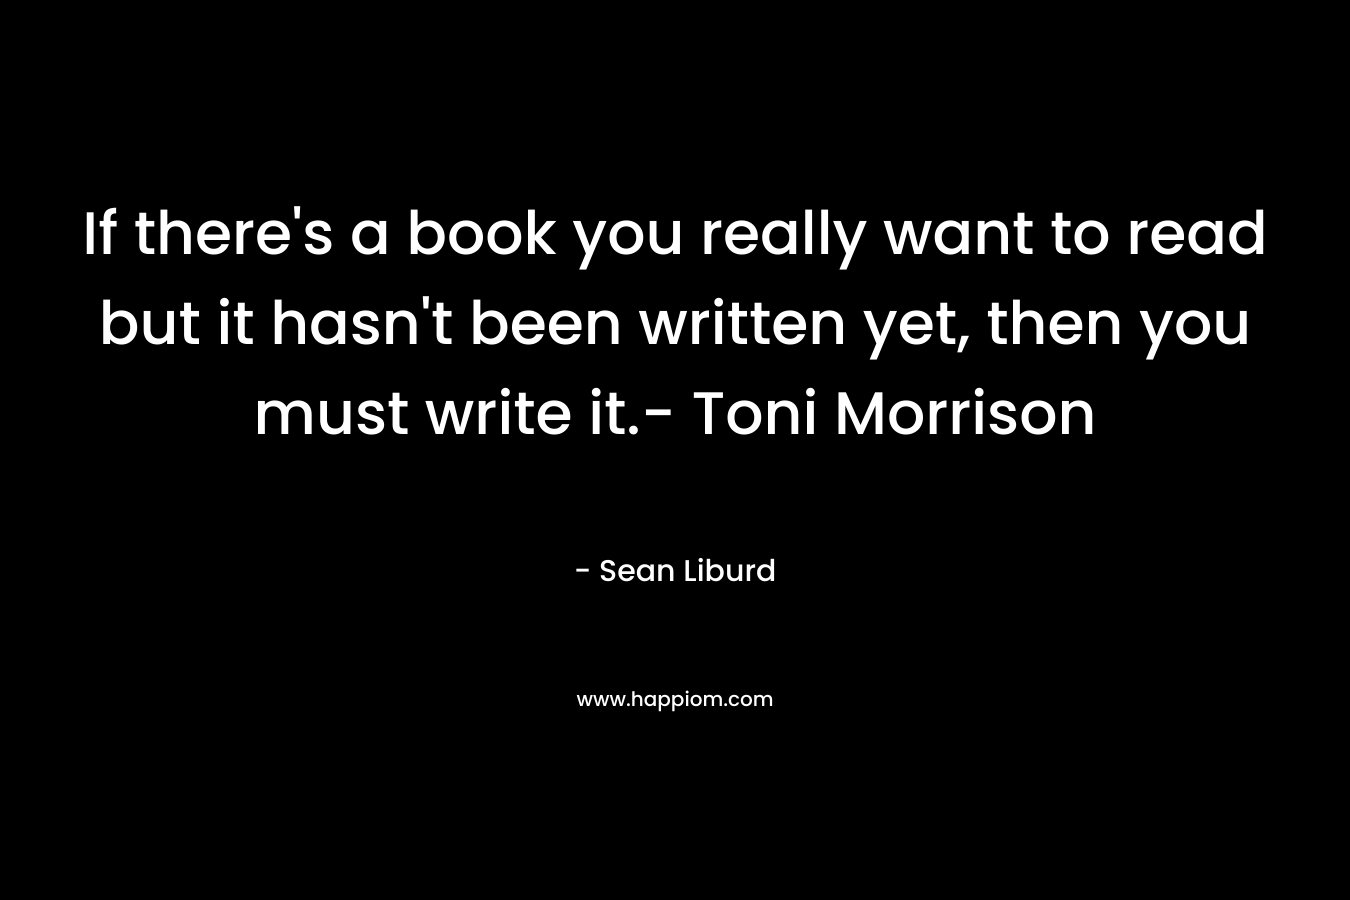 If there's a book you really want to read but it hasn't been written yet, then you must write it.- Toni Morrison